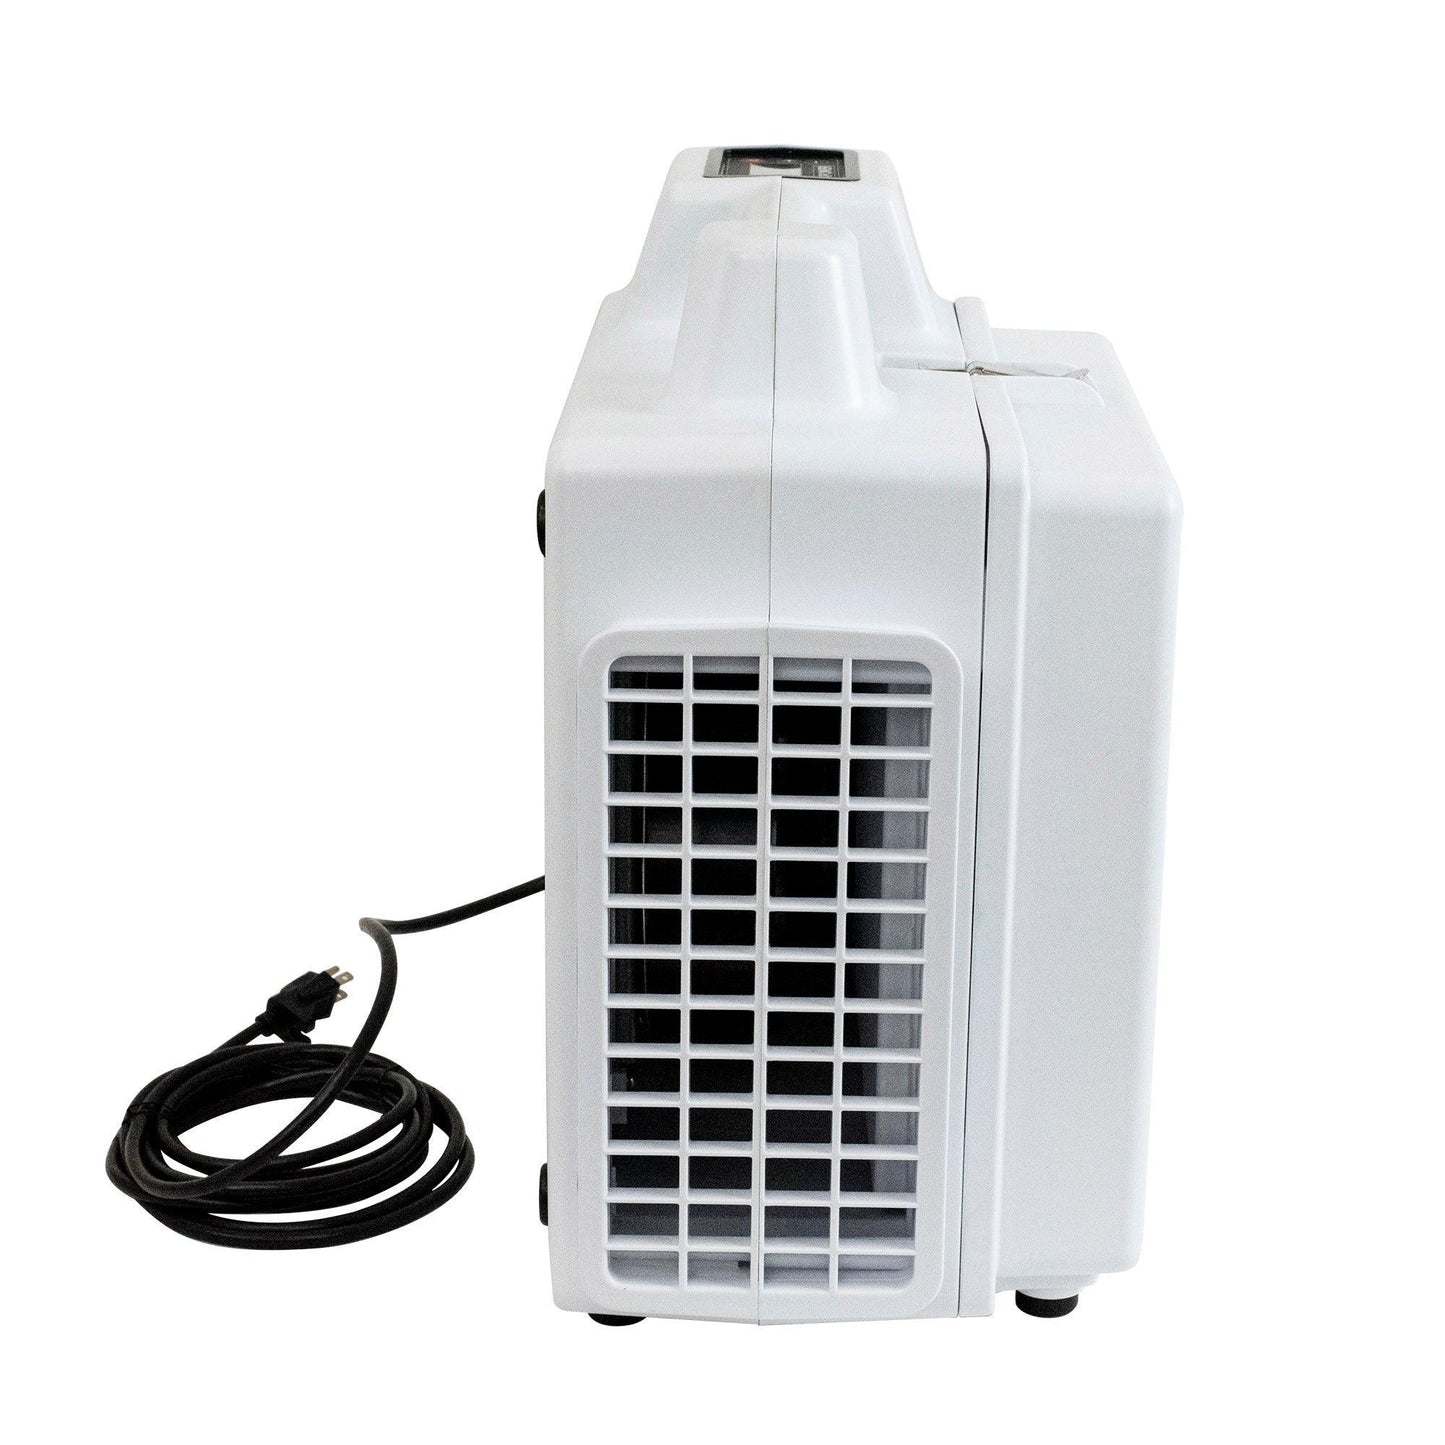 XPOWER X-2800 Commercial 3 Stage Filtration HEPA Purifier System, Negative Air Machine, airborne Air Cleaner, Mini Air Scrubber with PM2.5 Air Quality Sensor - Elite Air Purifiers